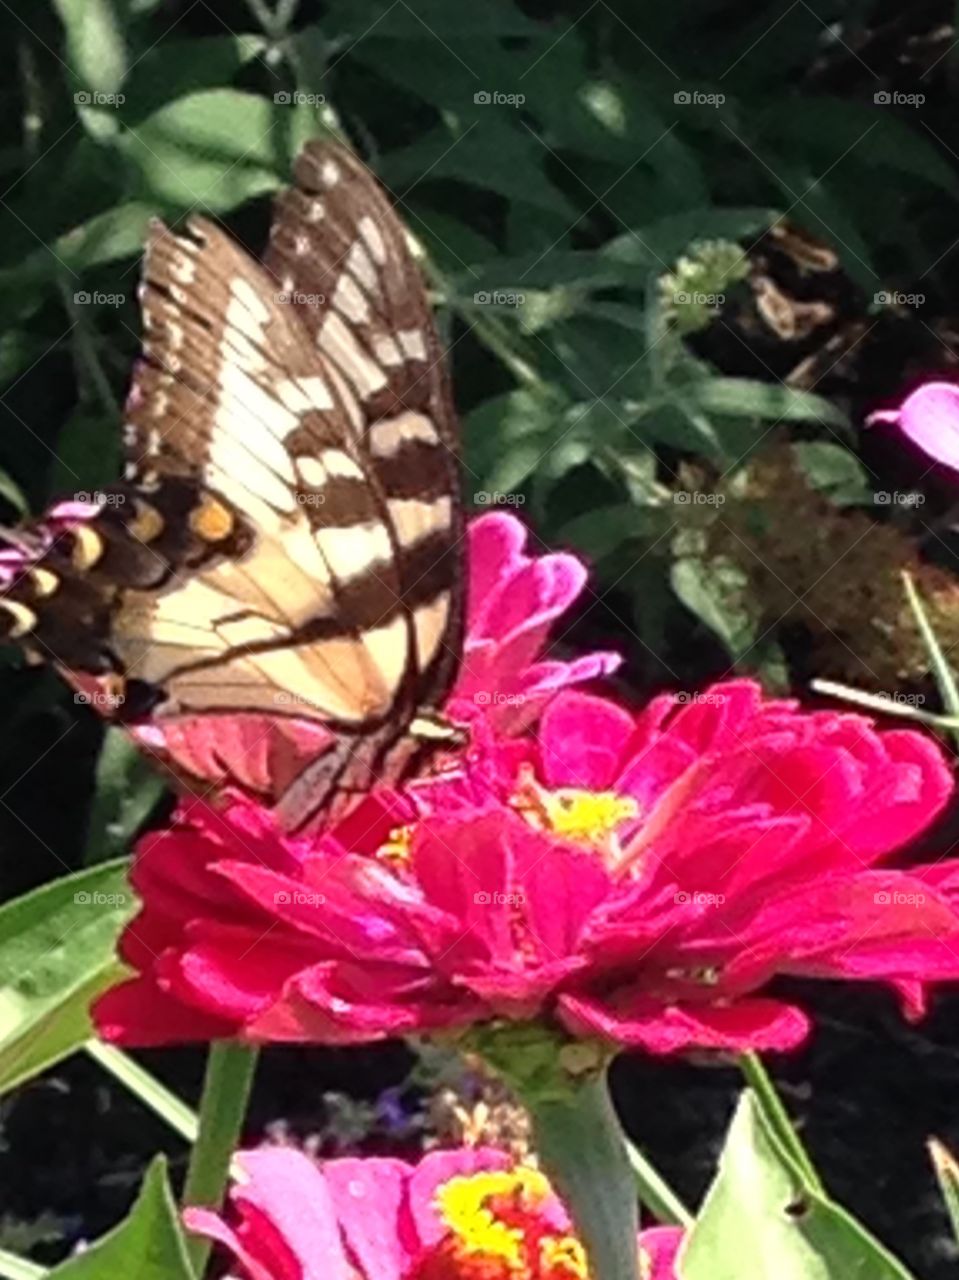 Love taking pictures of the flowers and butterflies! Looking forward to warm sunny days! 